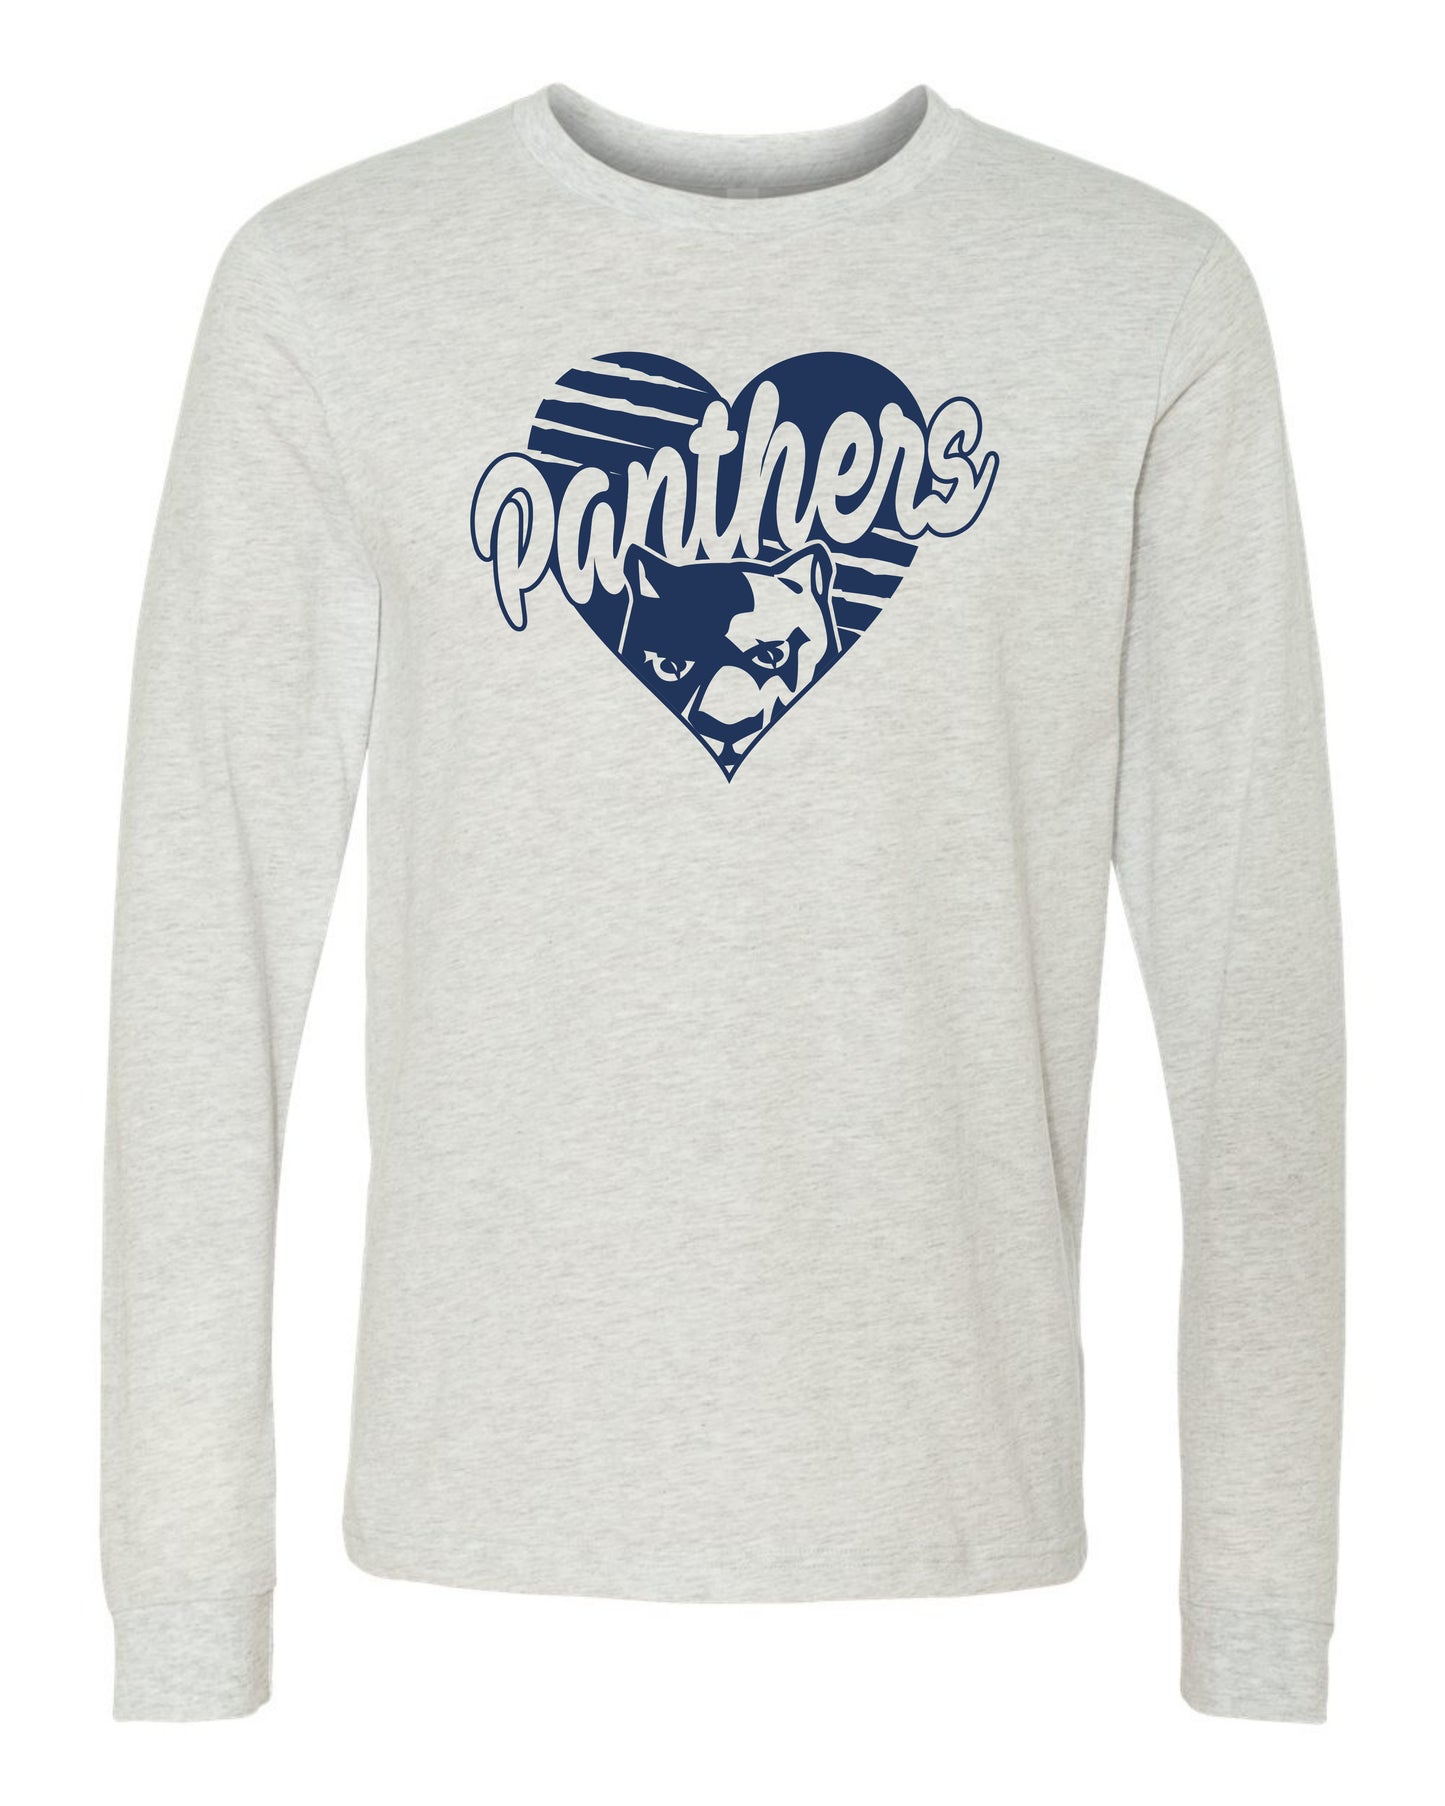 Panthers Heart - Adult Long Sleeve